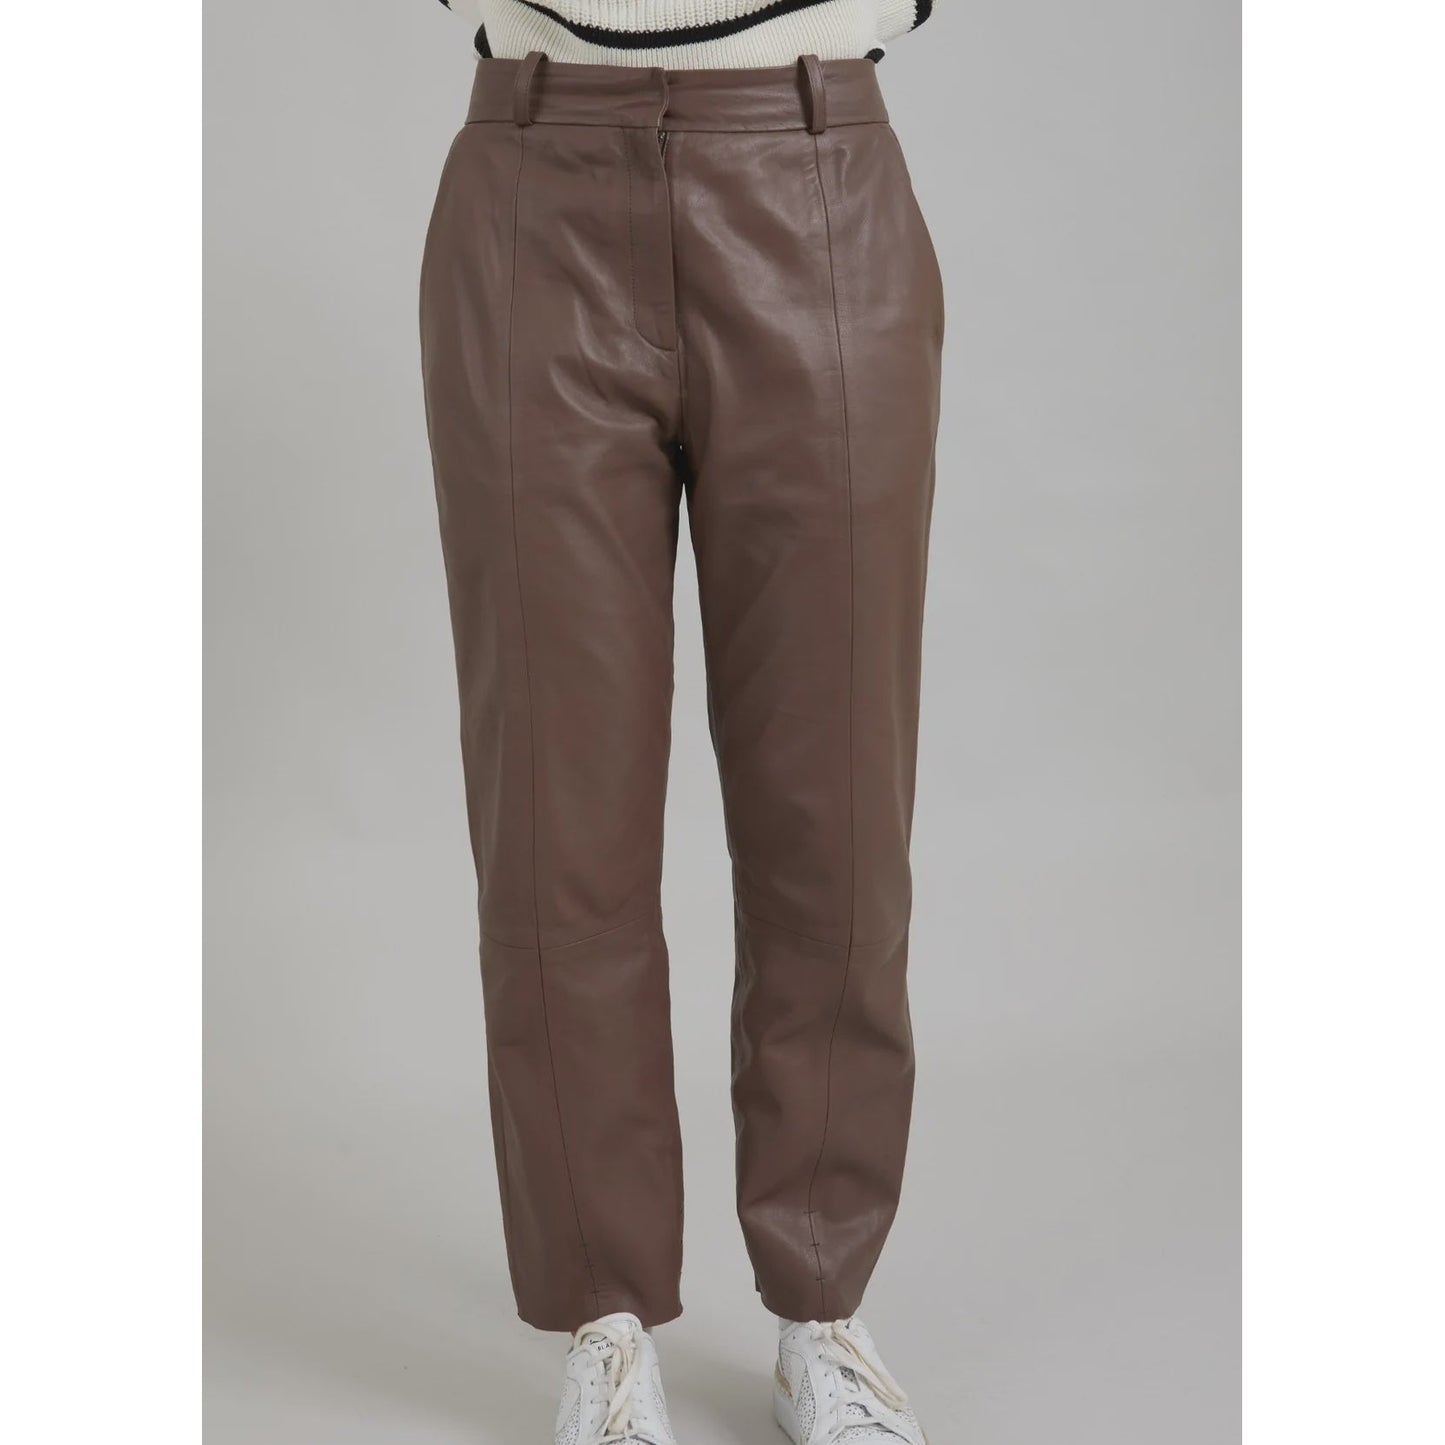 Coster  Leather Pants Lucia Fit - Spring Brown